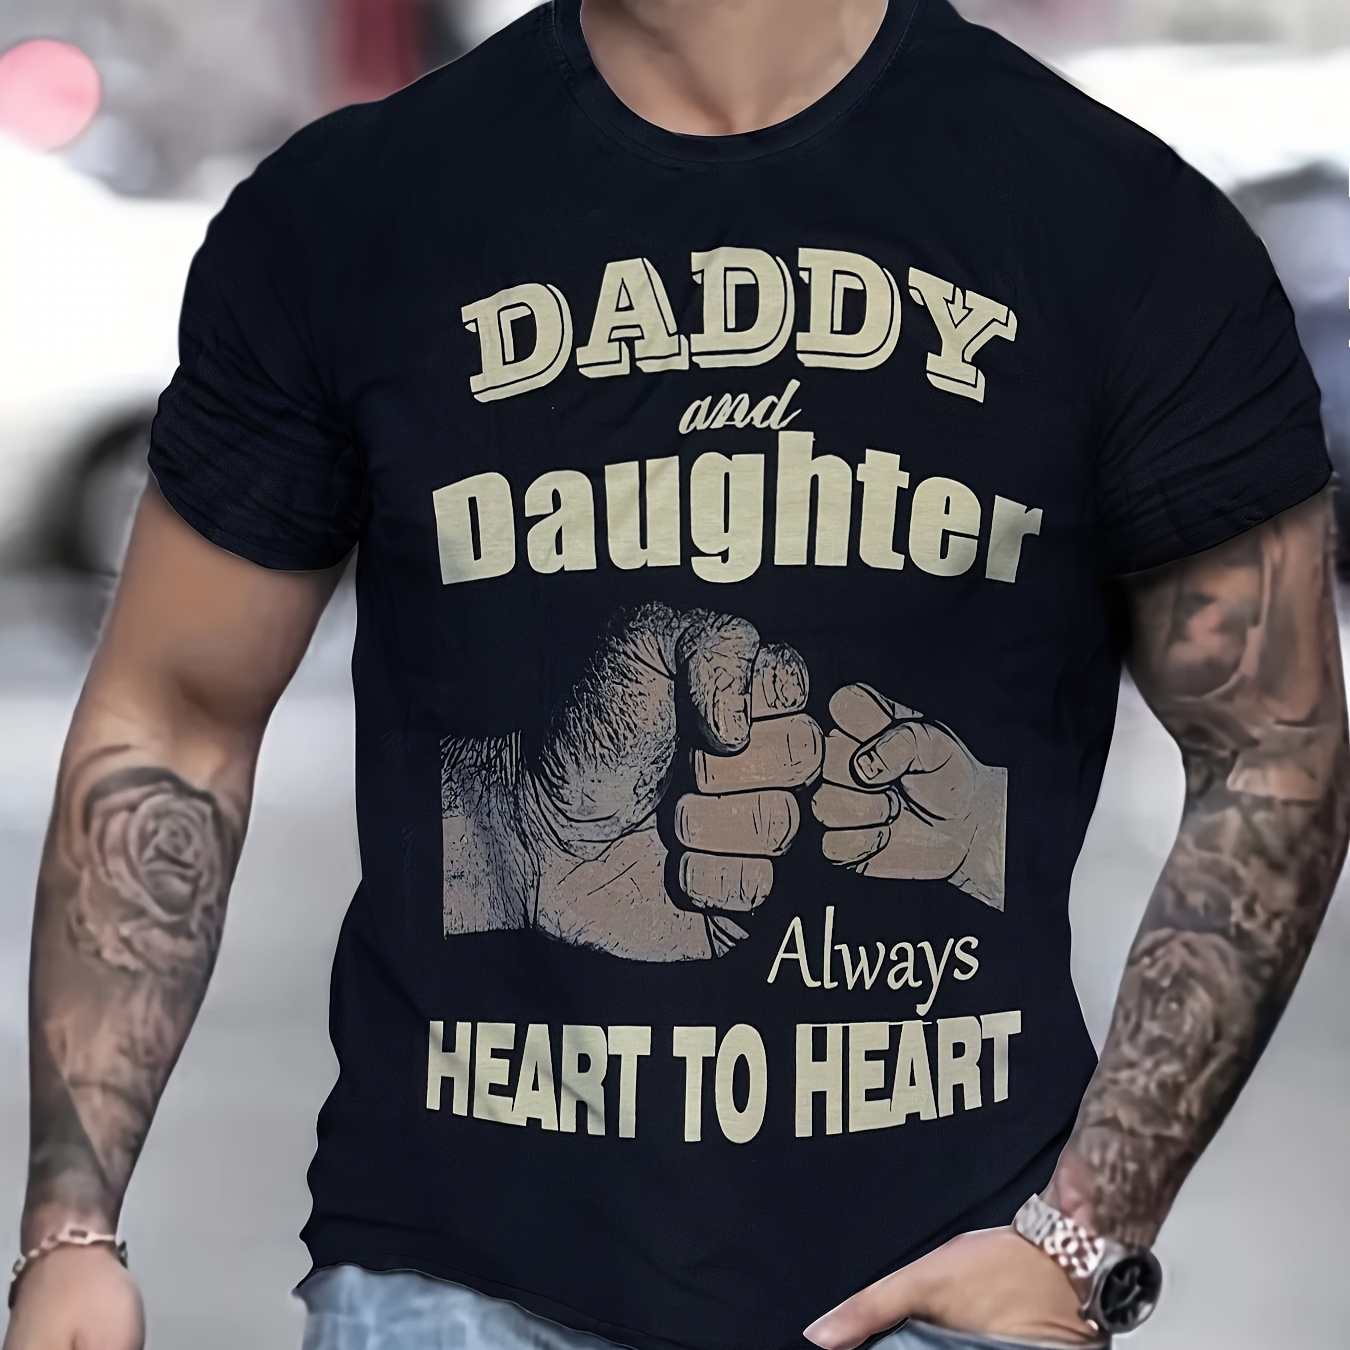 

Plus Size Men's Fists Beating Graphic Print T-shirt For Summer, Trendy Casual Short Sleeve Tees For Outdoor Sports, Father's Day